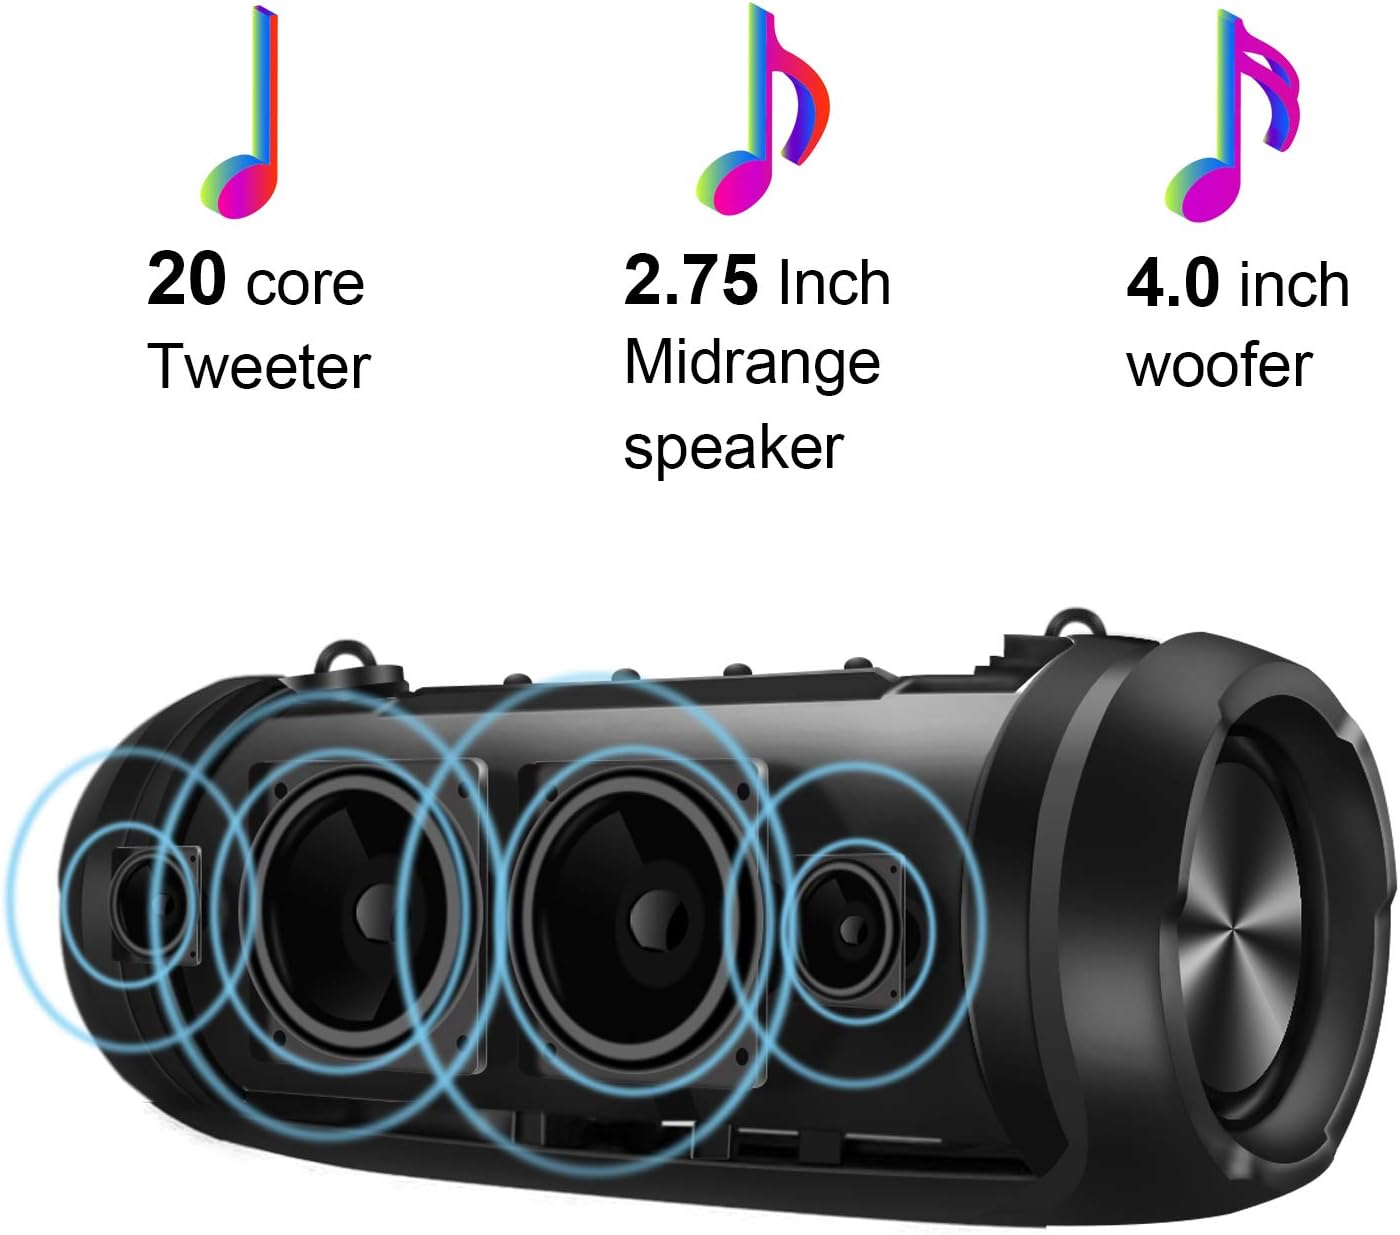 Bluetooth Speaker 30 W with Radio FM Music Box with 360° HD Stereo Sound, Up to 30 Hours Wireless Music Playback Support AUX, TF (Black)